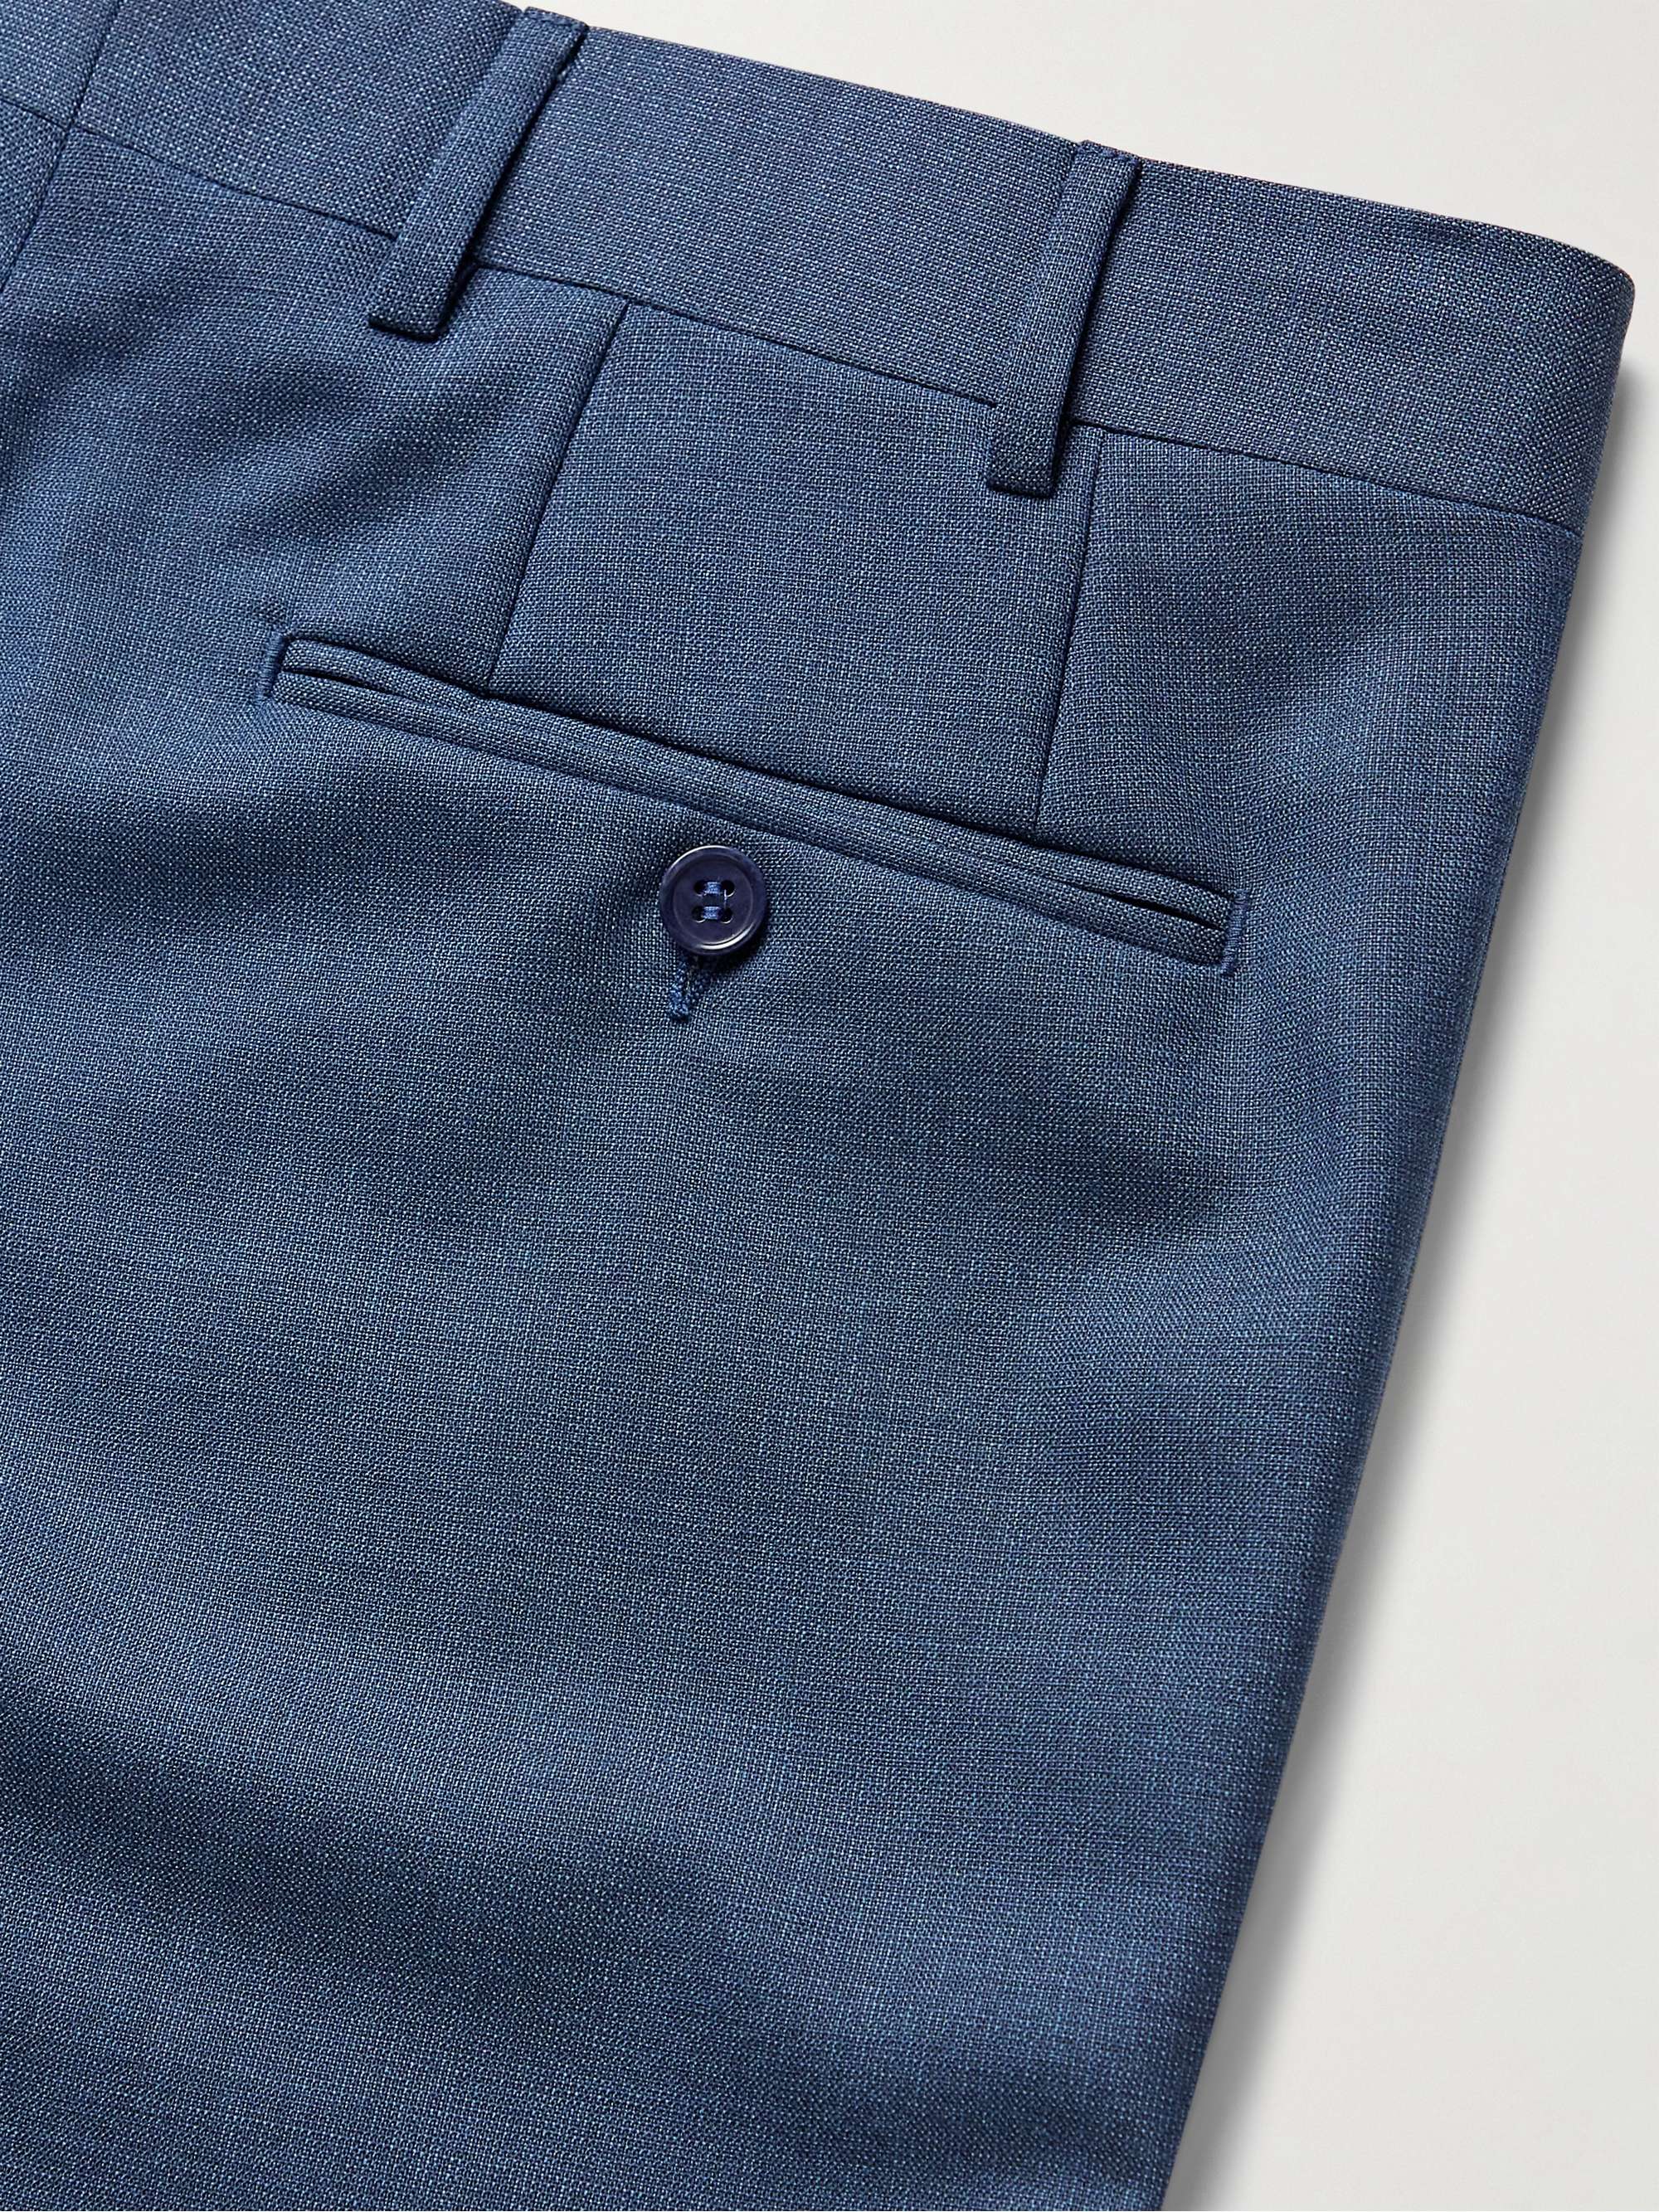 CANALI Slim-Fit Wool Suit Trousers